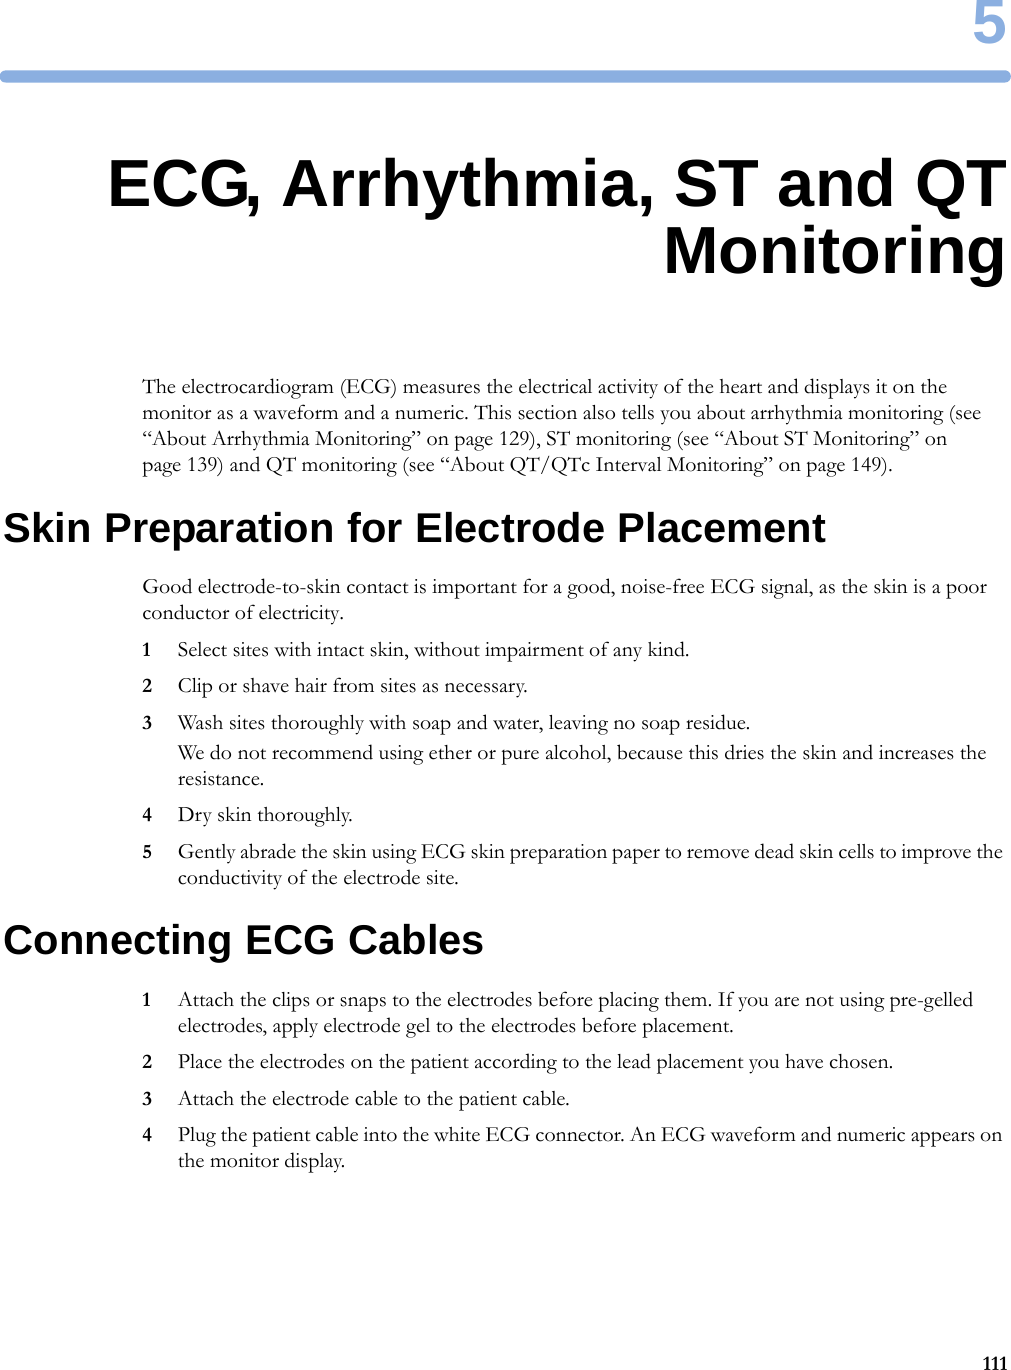 51115ECG, Arrhythmia, ST and QTMonitoringThe electrocardiogram (ECG) measures the electrical activity of the heart and displays it on the monitor as a waveform and a numeric. This section also tells you about arrhythmia monitoring (see “About Arrhythmia Monitoring” on page 129), ST monitoring (see “About ST Monitoring” on page 139) and QT monitoring (see “About QT/QTc Interval Monitoring” on page 149).Skin Preparation for Electrode PlacementGood electrode-to-skin contact is important for a good, noise-free ECG signal, as the skin is a poor conductor of electricity.1Select sites with intact skin, without impairment of any kind.2Clip or shave hair from sites as necessary.3Wash sites thoroughly with soap and water, leaving no soap residue.We do not recommend using ether or pure alcohol, because this dries the skin and increases the resistance.4Dry skin thoroughly.5Gently abrade the skin using ECG skin preparation paper to remove dead skin cells to improve the conductivity of the electrode site.Connecting ECG Cables1Attach the clips or snaps to the electrodes before placing them. If you are not using pre-gelled electrodes, apply electrode gel to the electrodes before placement.2Place the electrodes on the patient according to the lead placement you have chosen.3Attach the electrode cable to the patient cable.4Plug the patient cable into the white ECG connector. An ECG waveform and numeric appears on the monitor display.